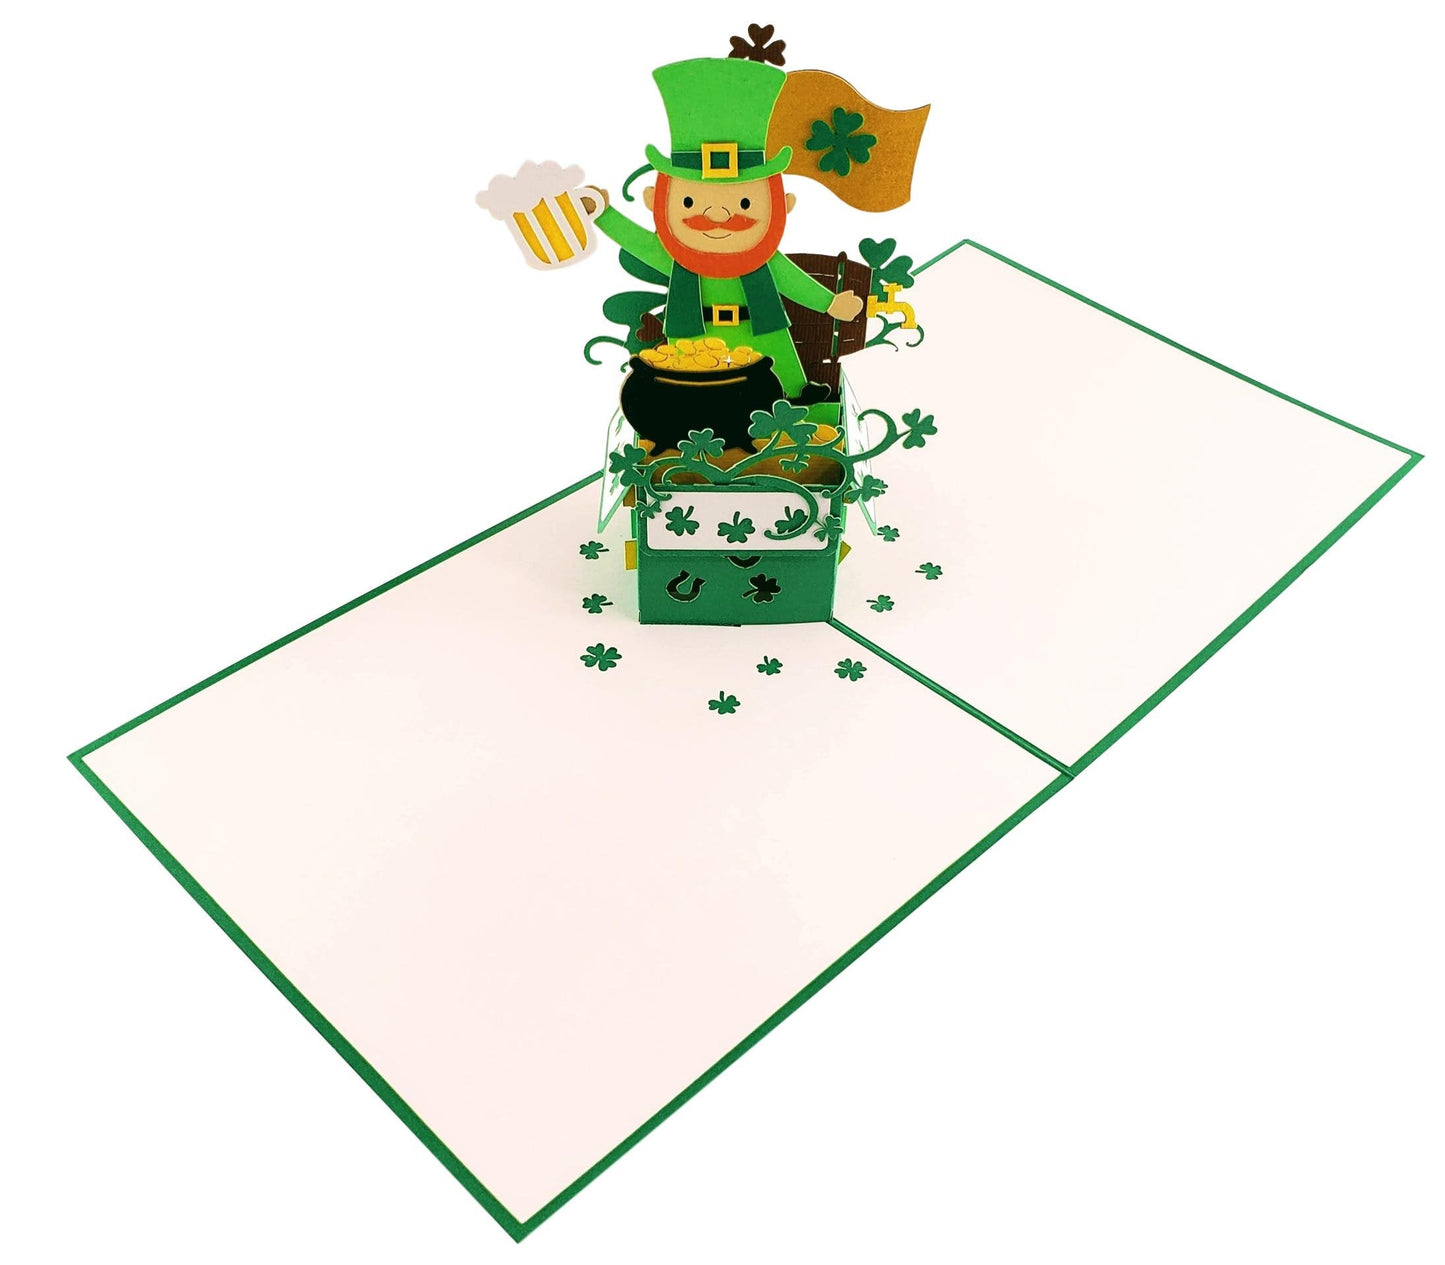 St. Patrick's Day Lucky Leprechaun 3D Pop Up Card - Good Luck - Green - Iconic - St. Patrick's Day - iGifts And Cards